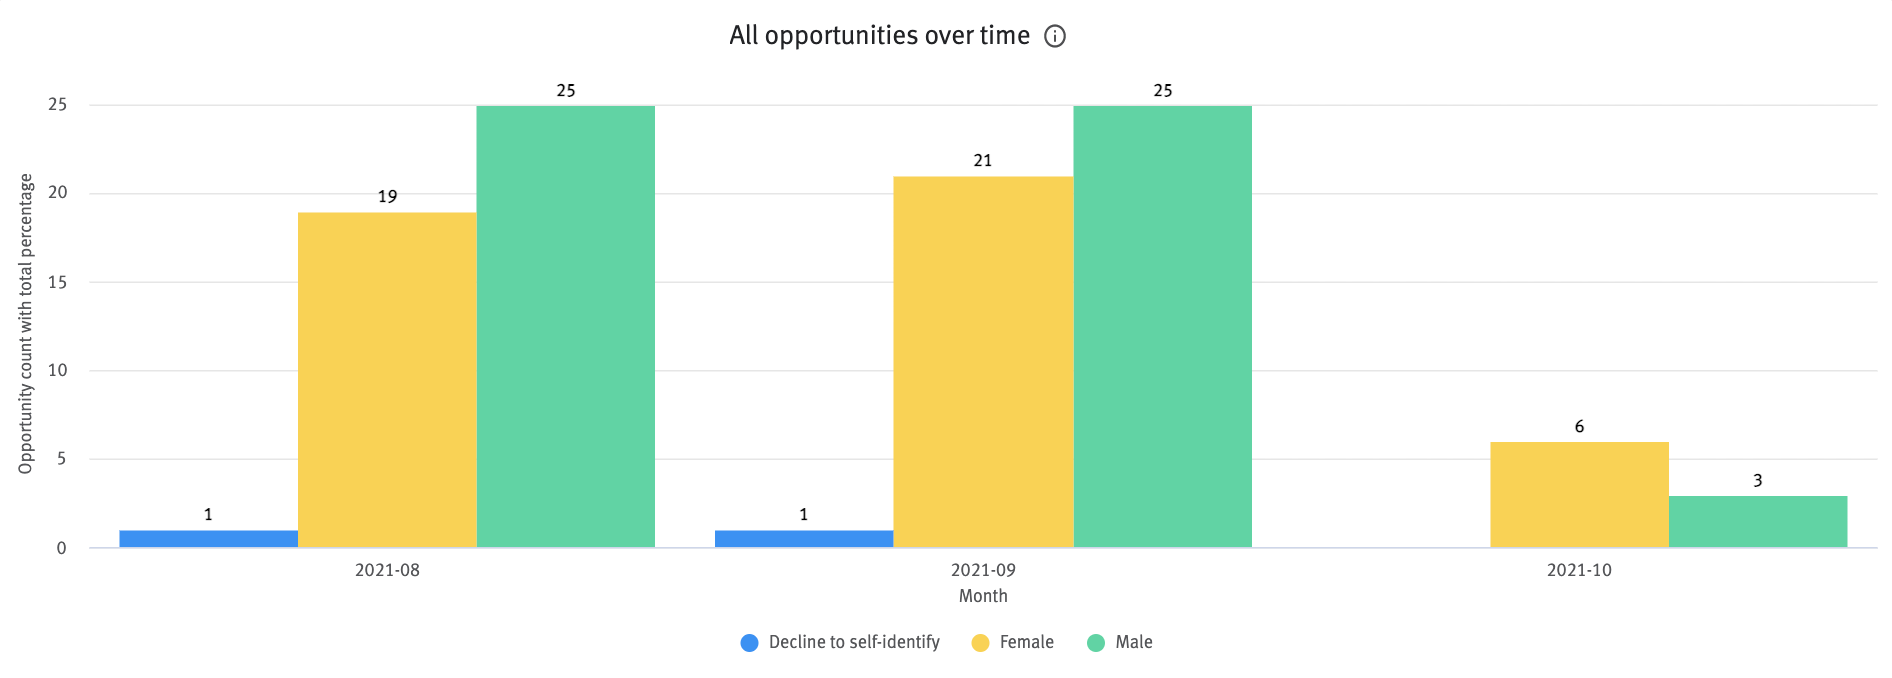 All opportunities over time chart